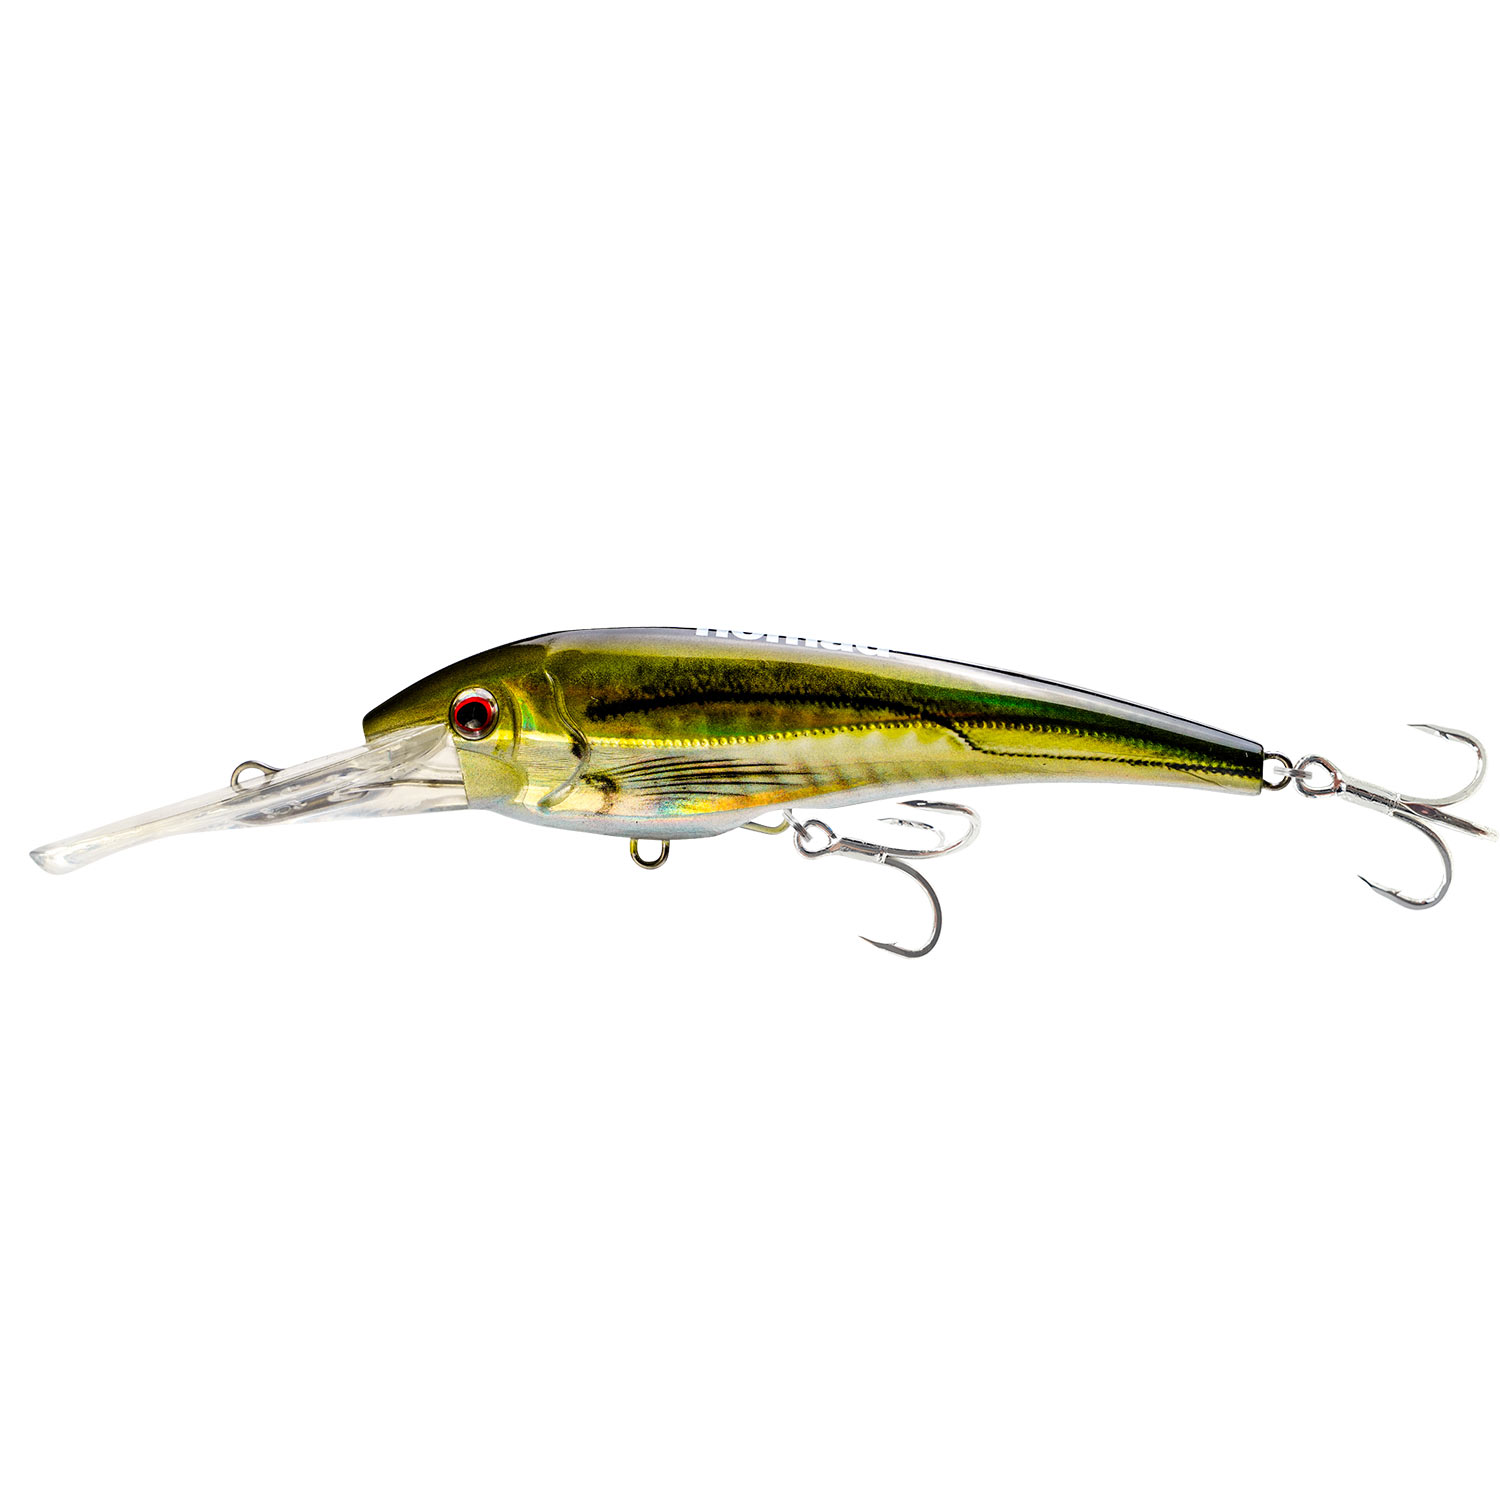 NOMAD DESIGN 4 3/4 DTX Minnow 120 Floating Trolling Lures, 1 1/4 Ounces